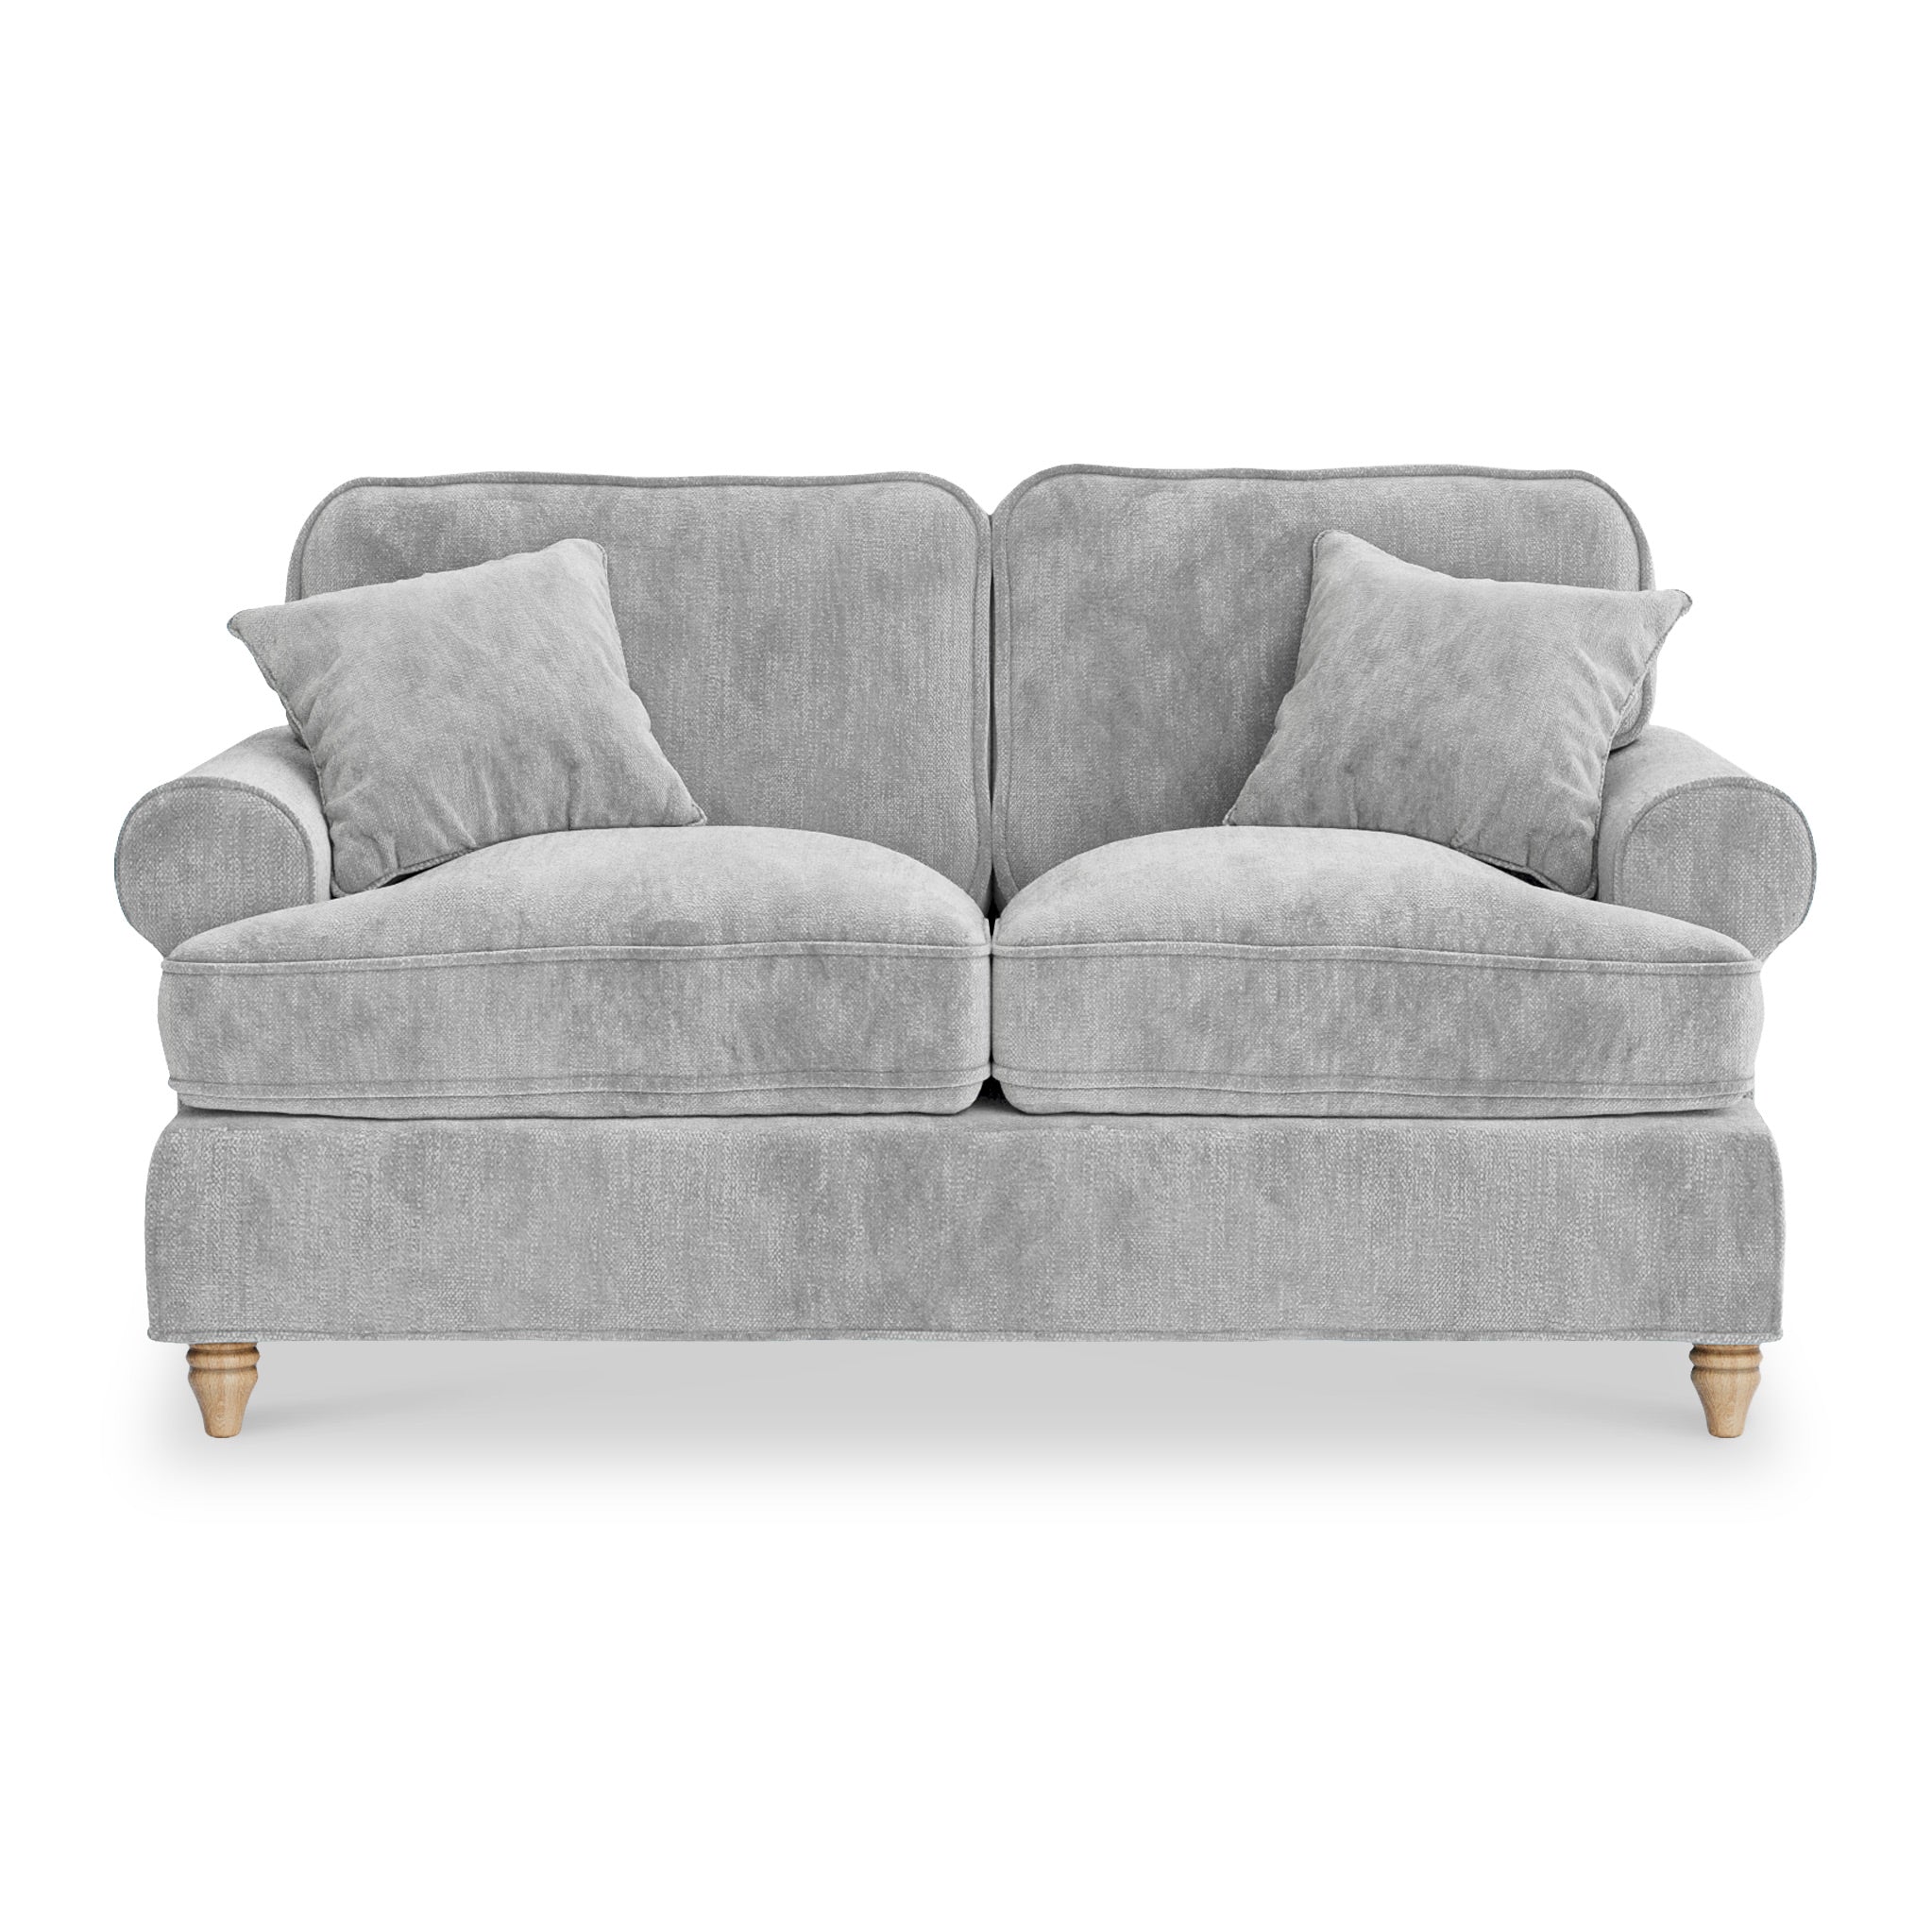 Alfie 2 Seater Sofa 8 Chenille Colours Made In The Uk Roseland